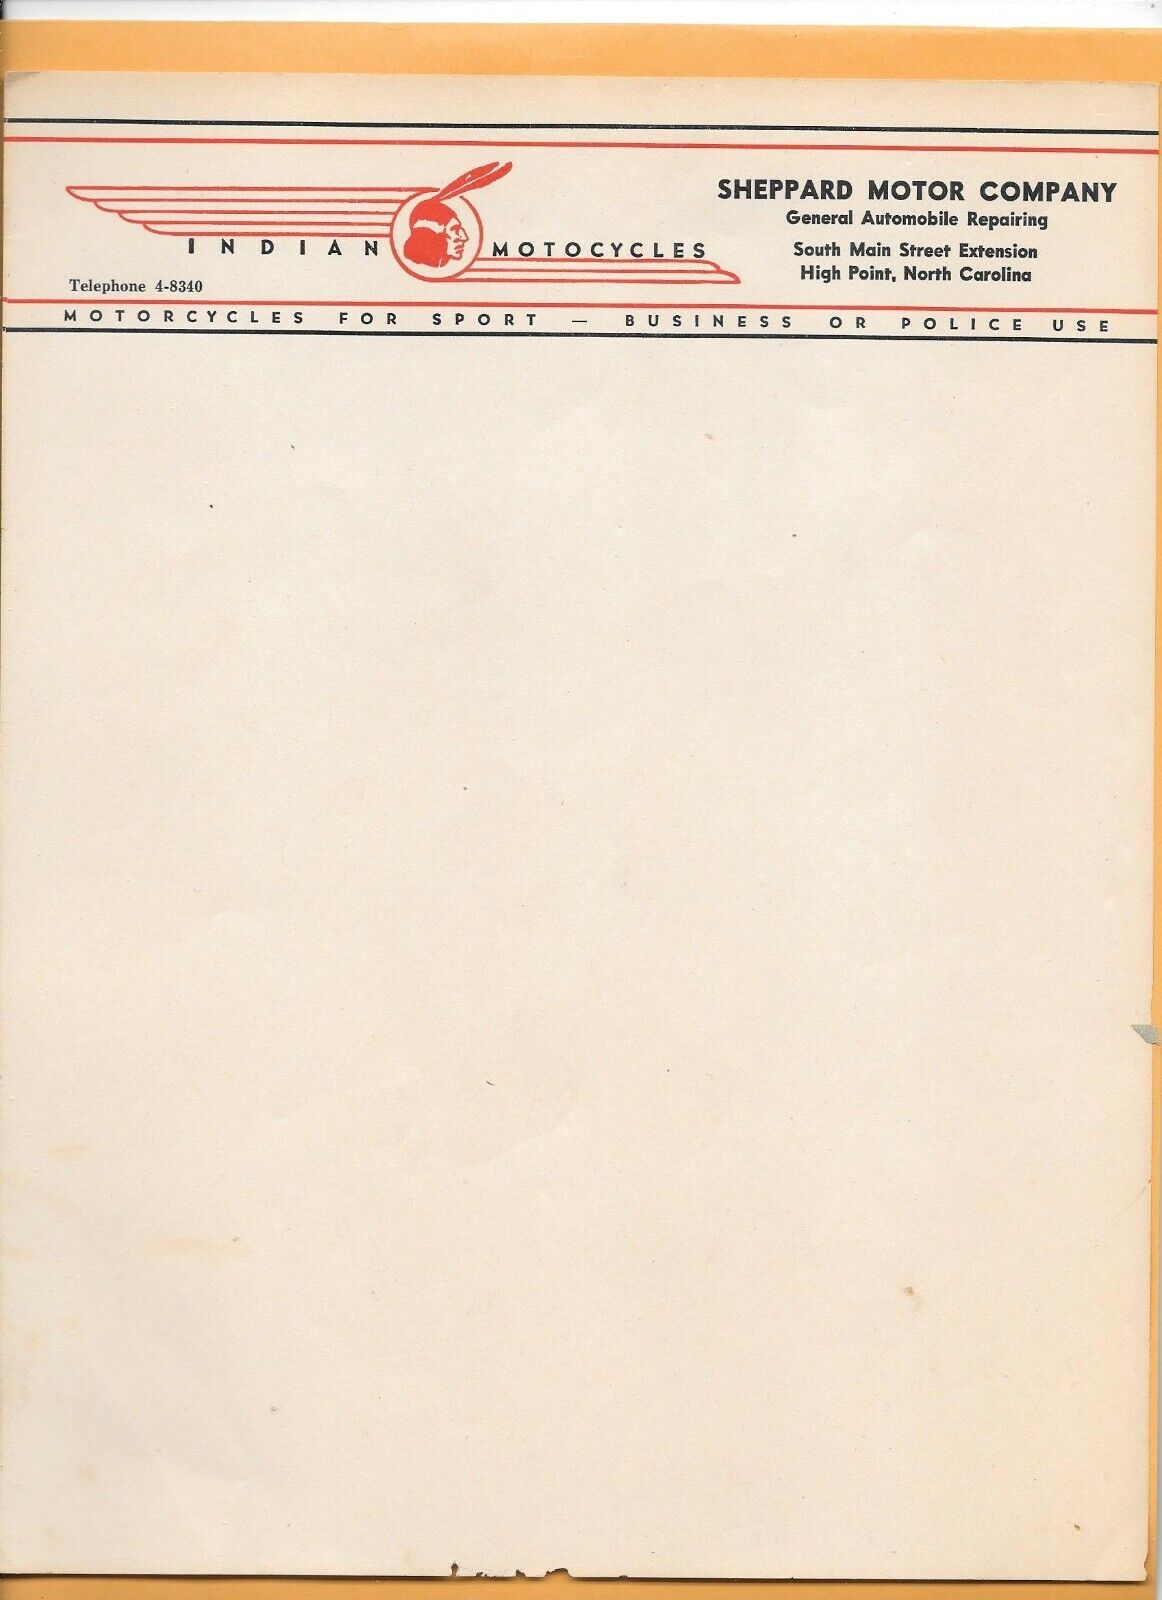 High Point, NC - Indian Motorcycles Letterhead - 1940s New Old Stock - RARE 